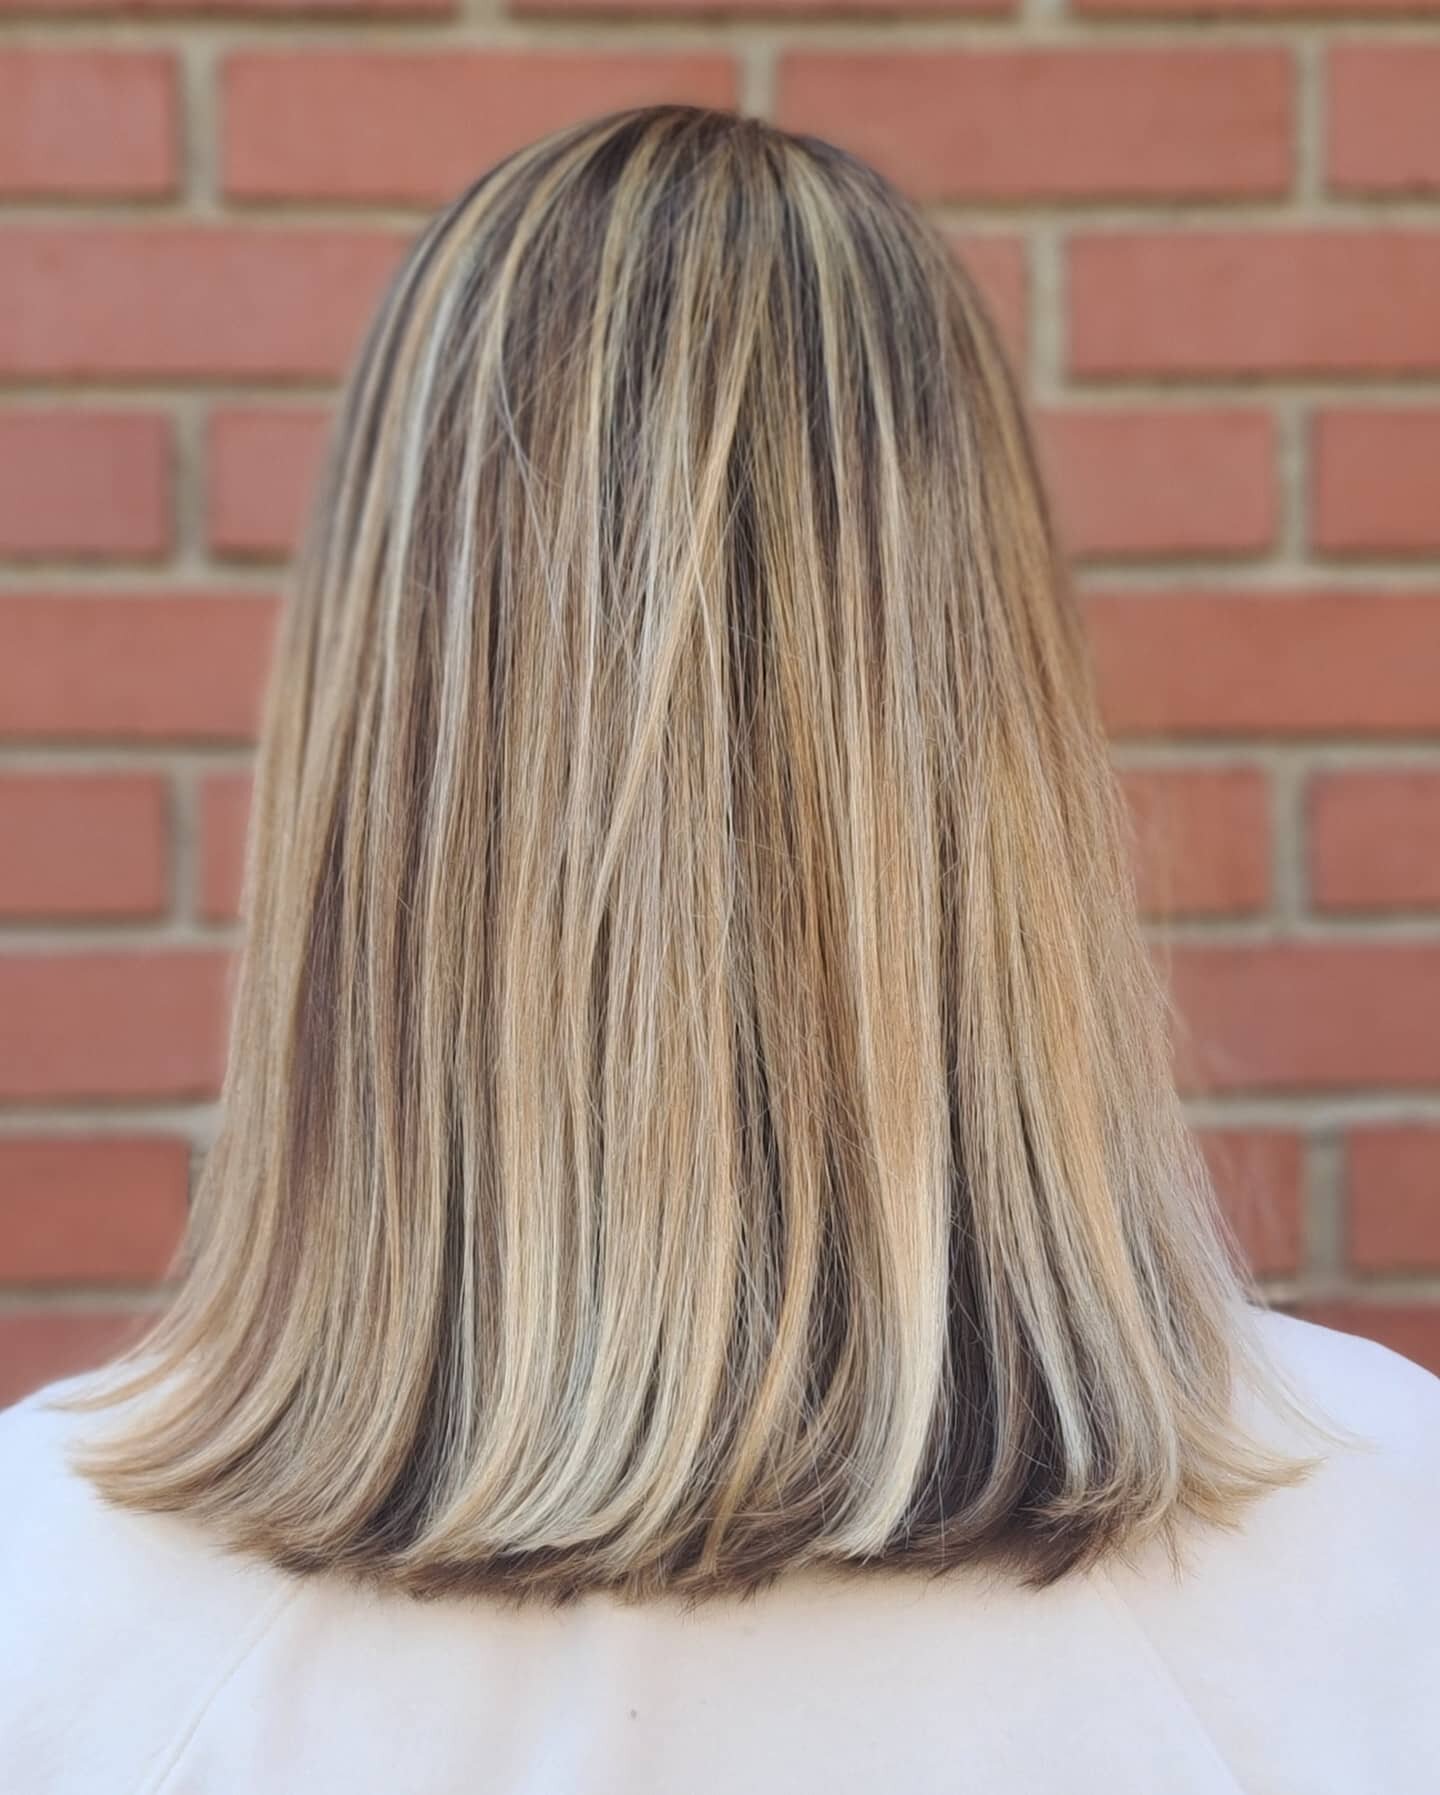 Balayage creates amazing dimension with minimal demarcation/grow out. 
Living in another city, this guest can't get in to my chair as often as we would always like. With sun-kissed, lived in balayage, you're able to wait a bit longer between appointm